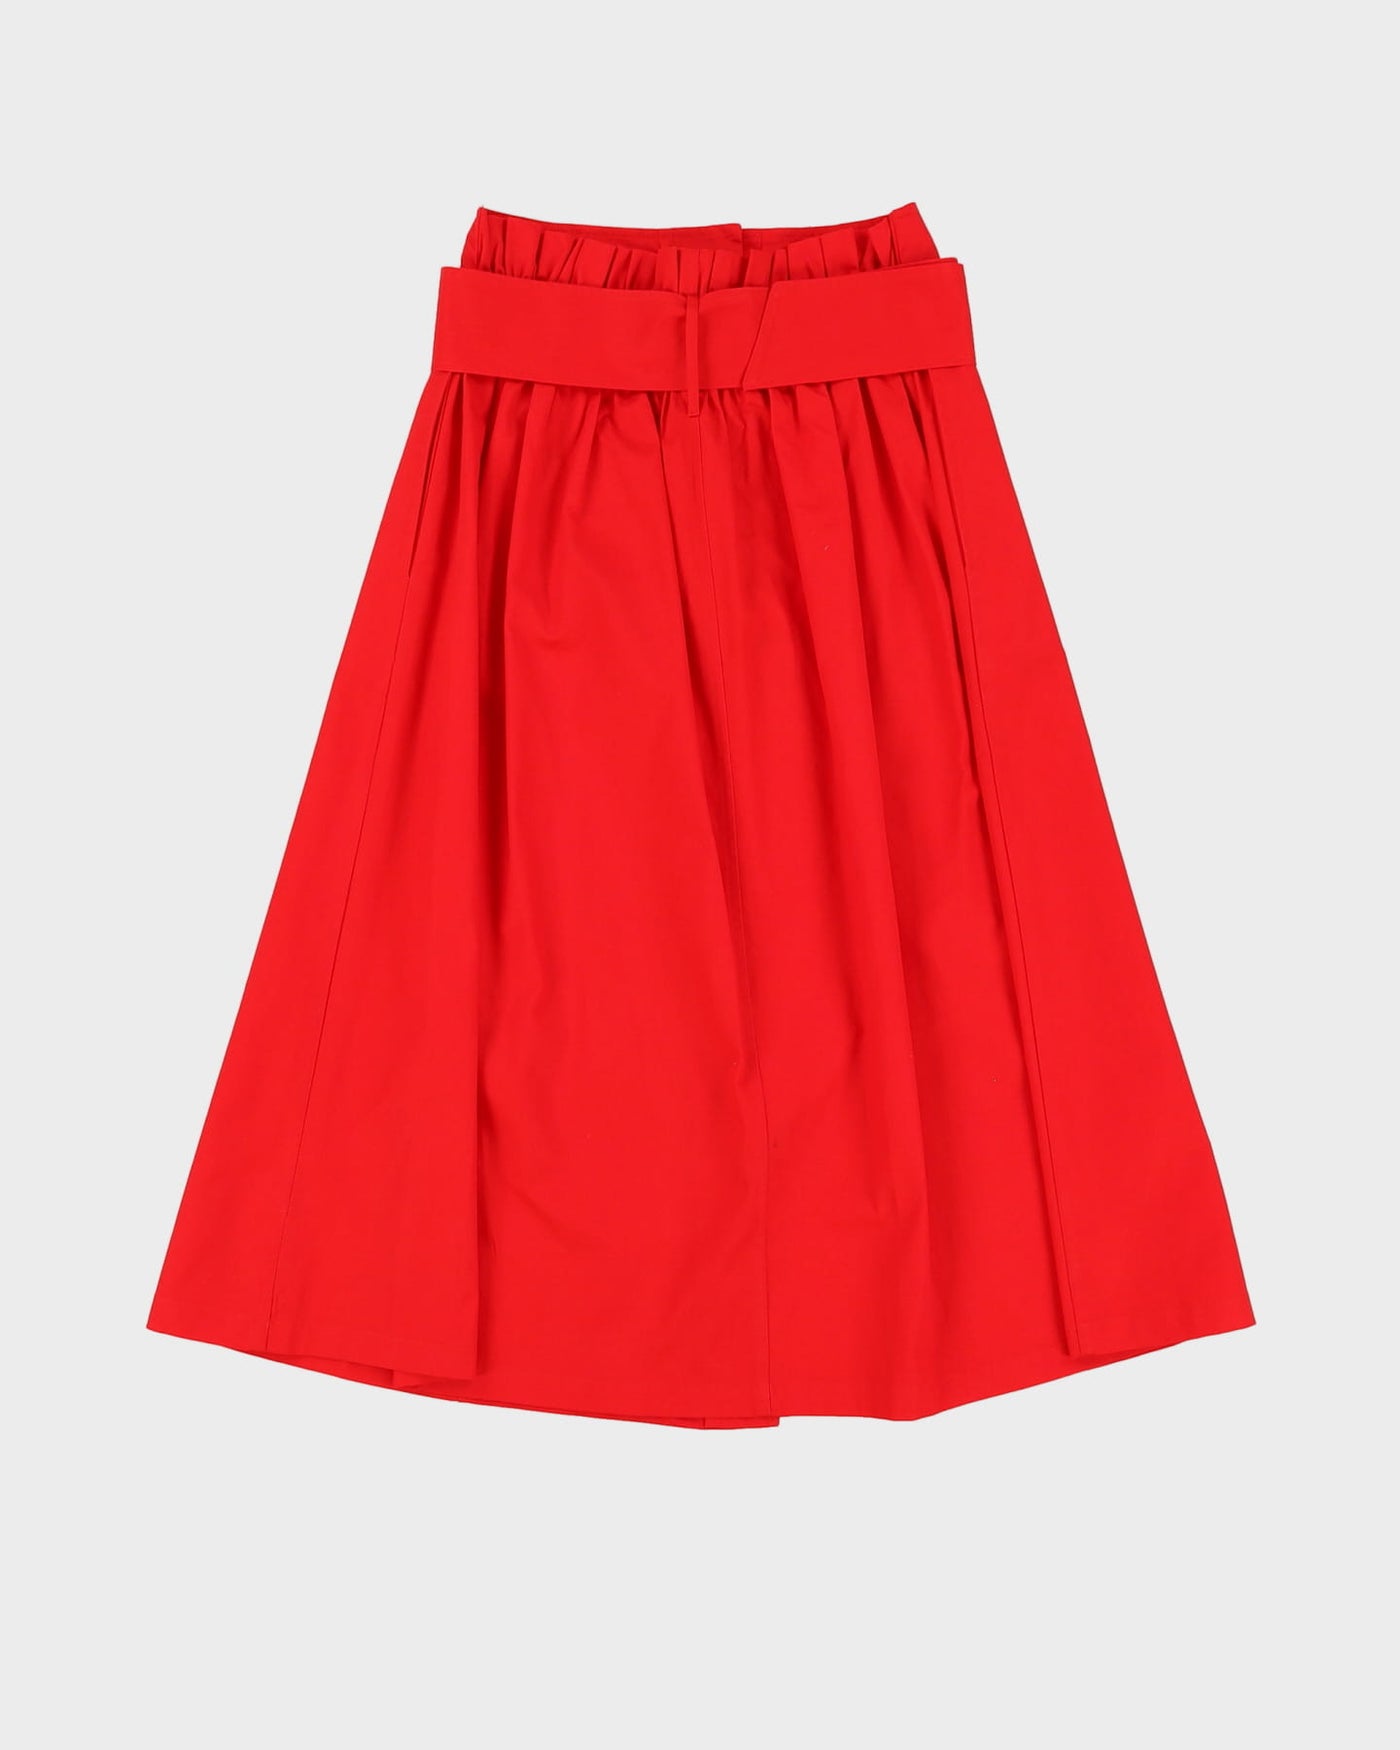 Red With Matching Belt A-line Skirt - XS